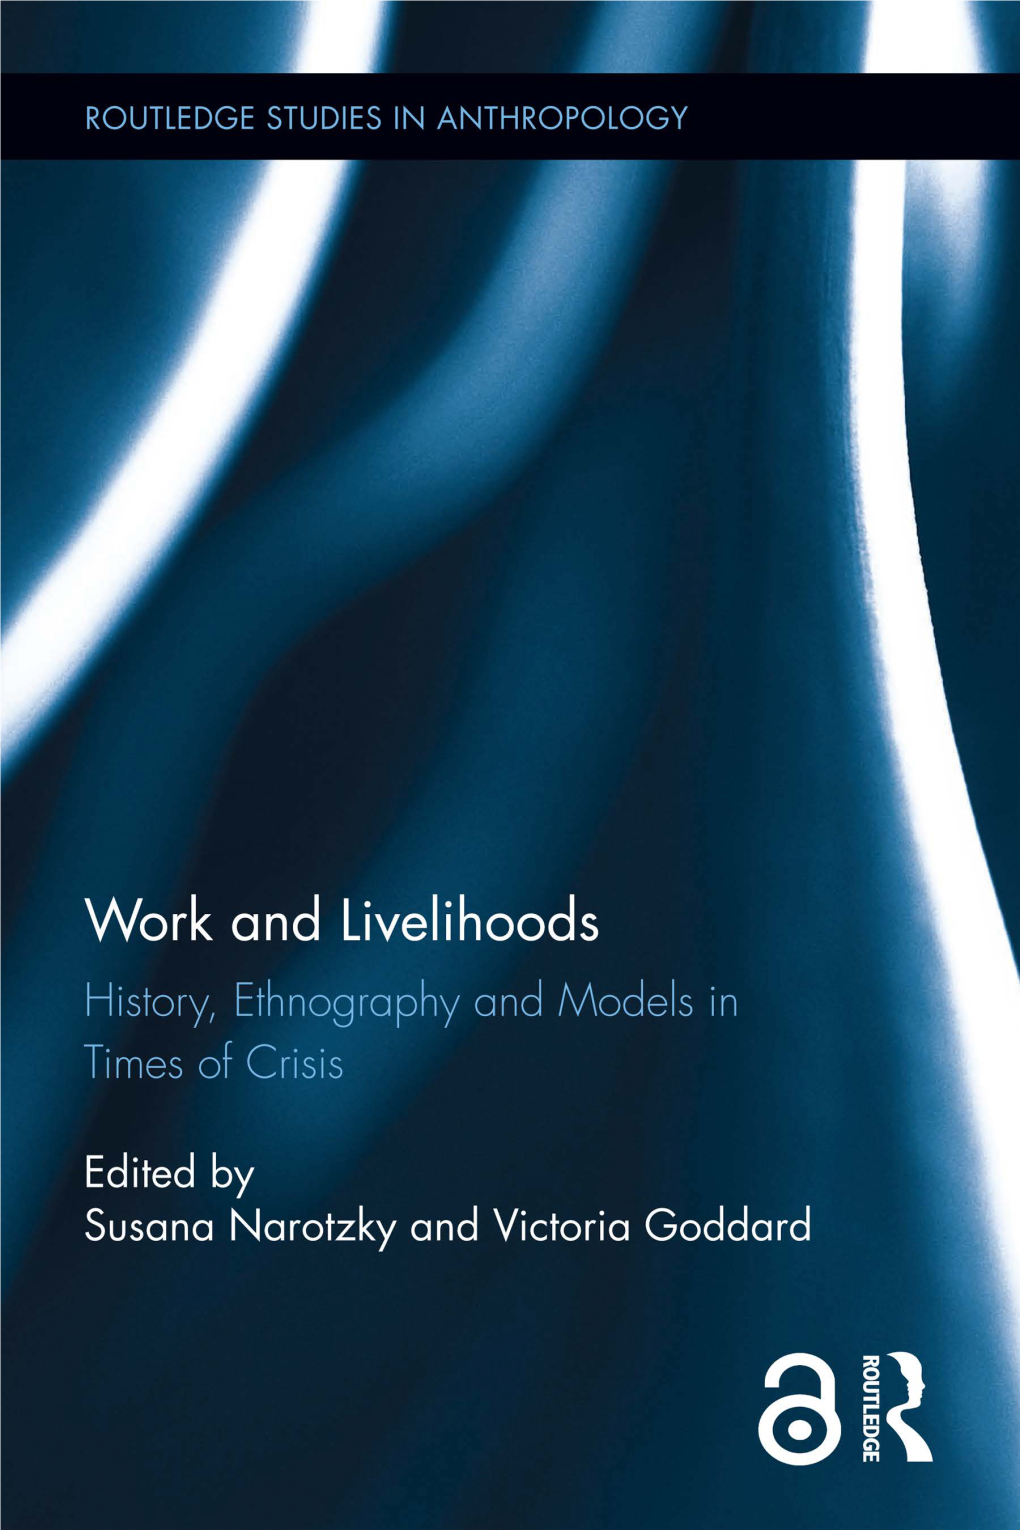 History, Ethnography and Models in Times of Crisis